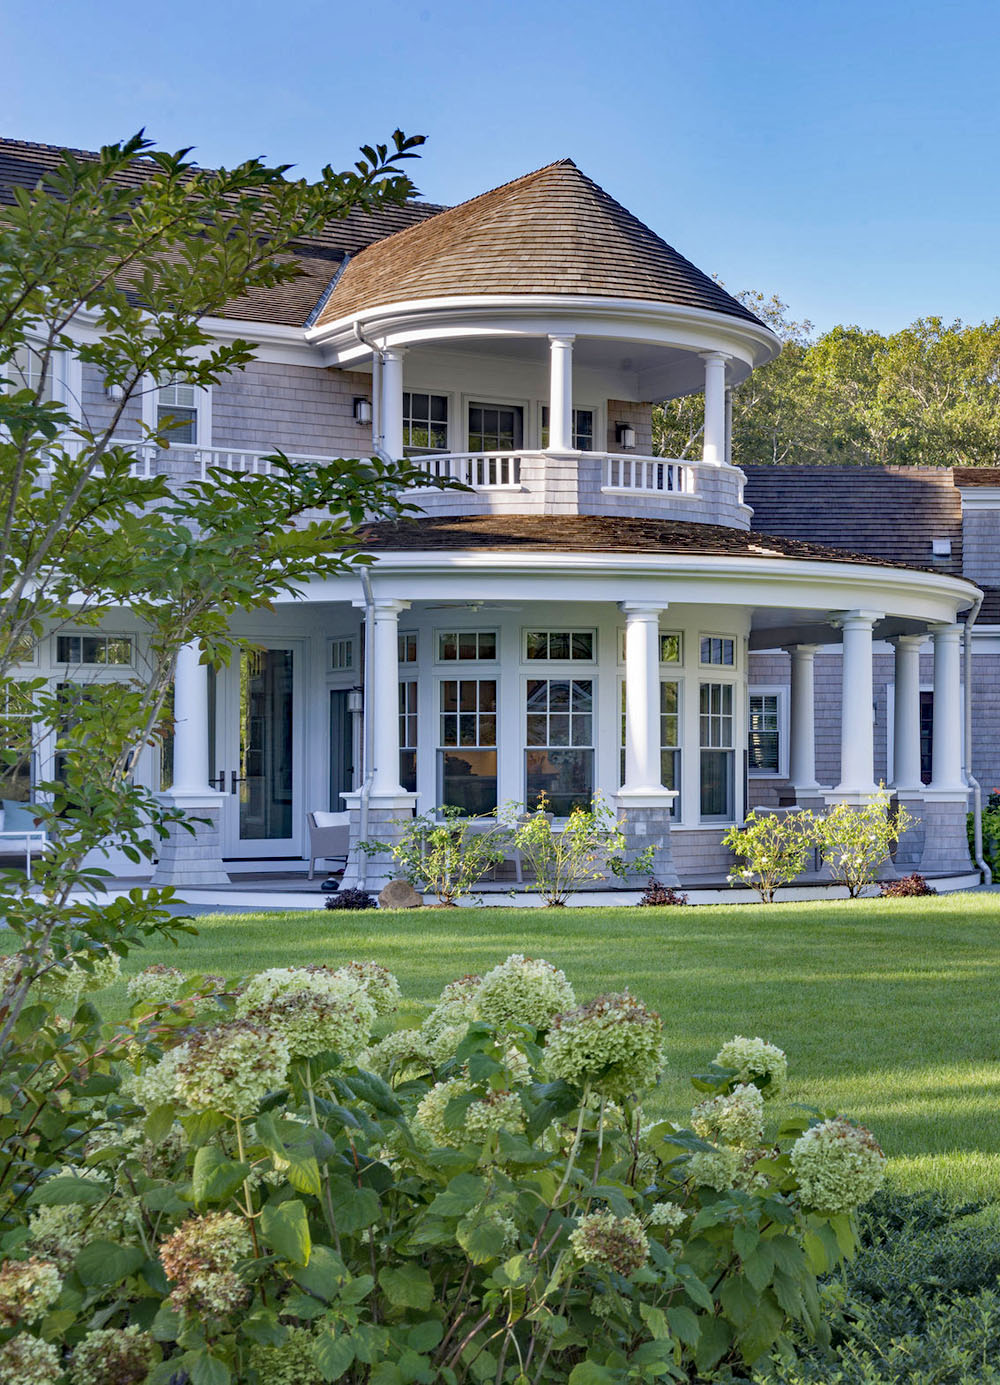 Coastal Shingle Style Cape Cod Home with Large Porch and Classical Columns